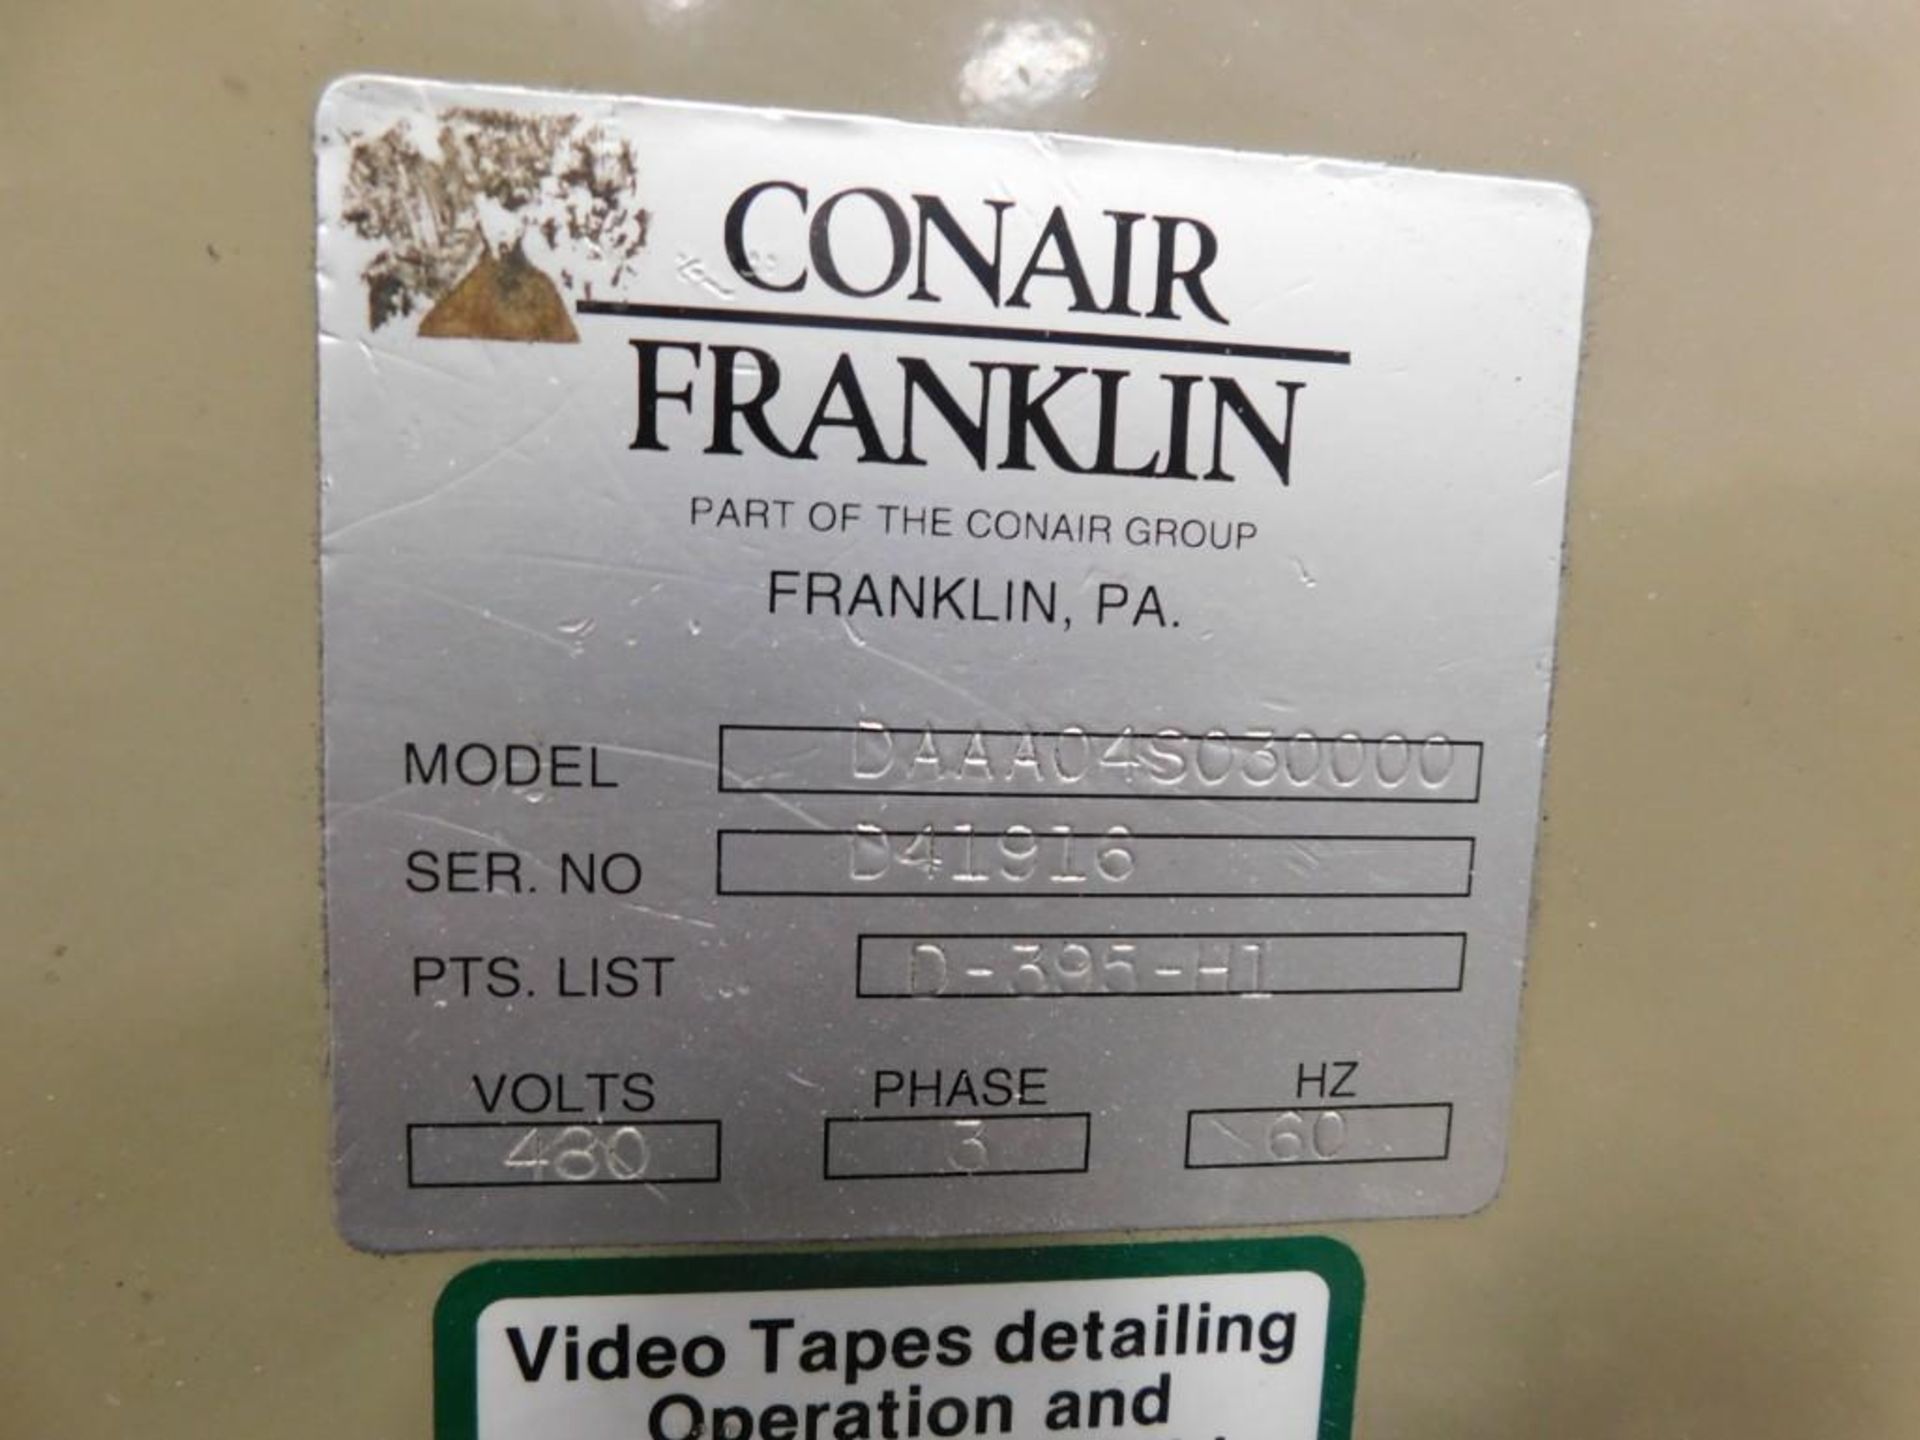 Conair Franklin D04A400031, Conair Franklin CM401, (2) Conair Franklin DAAA04S030000, Portable Mater - Image 16 of 16